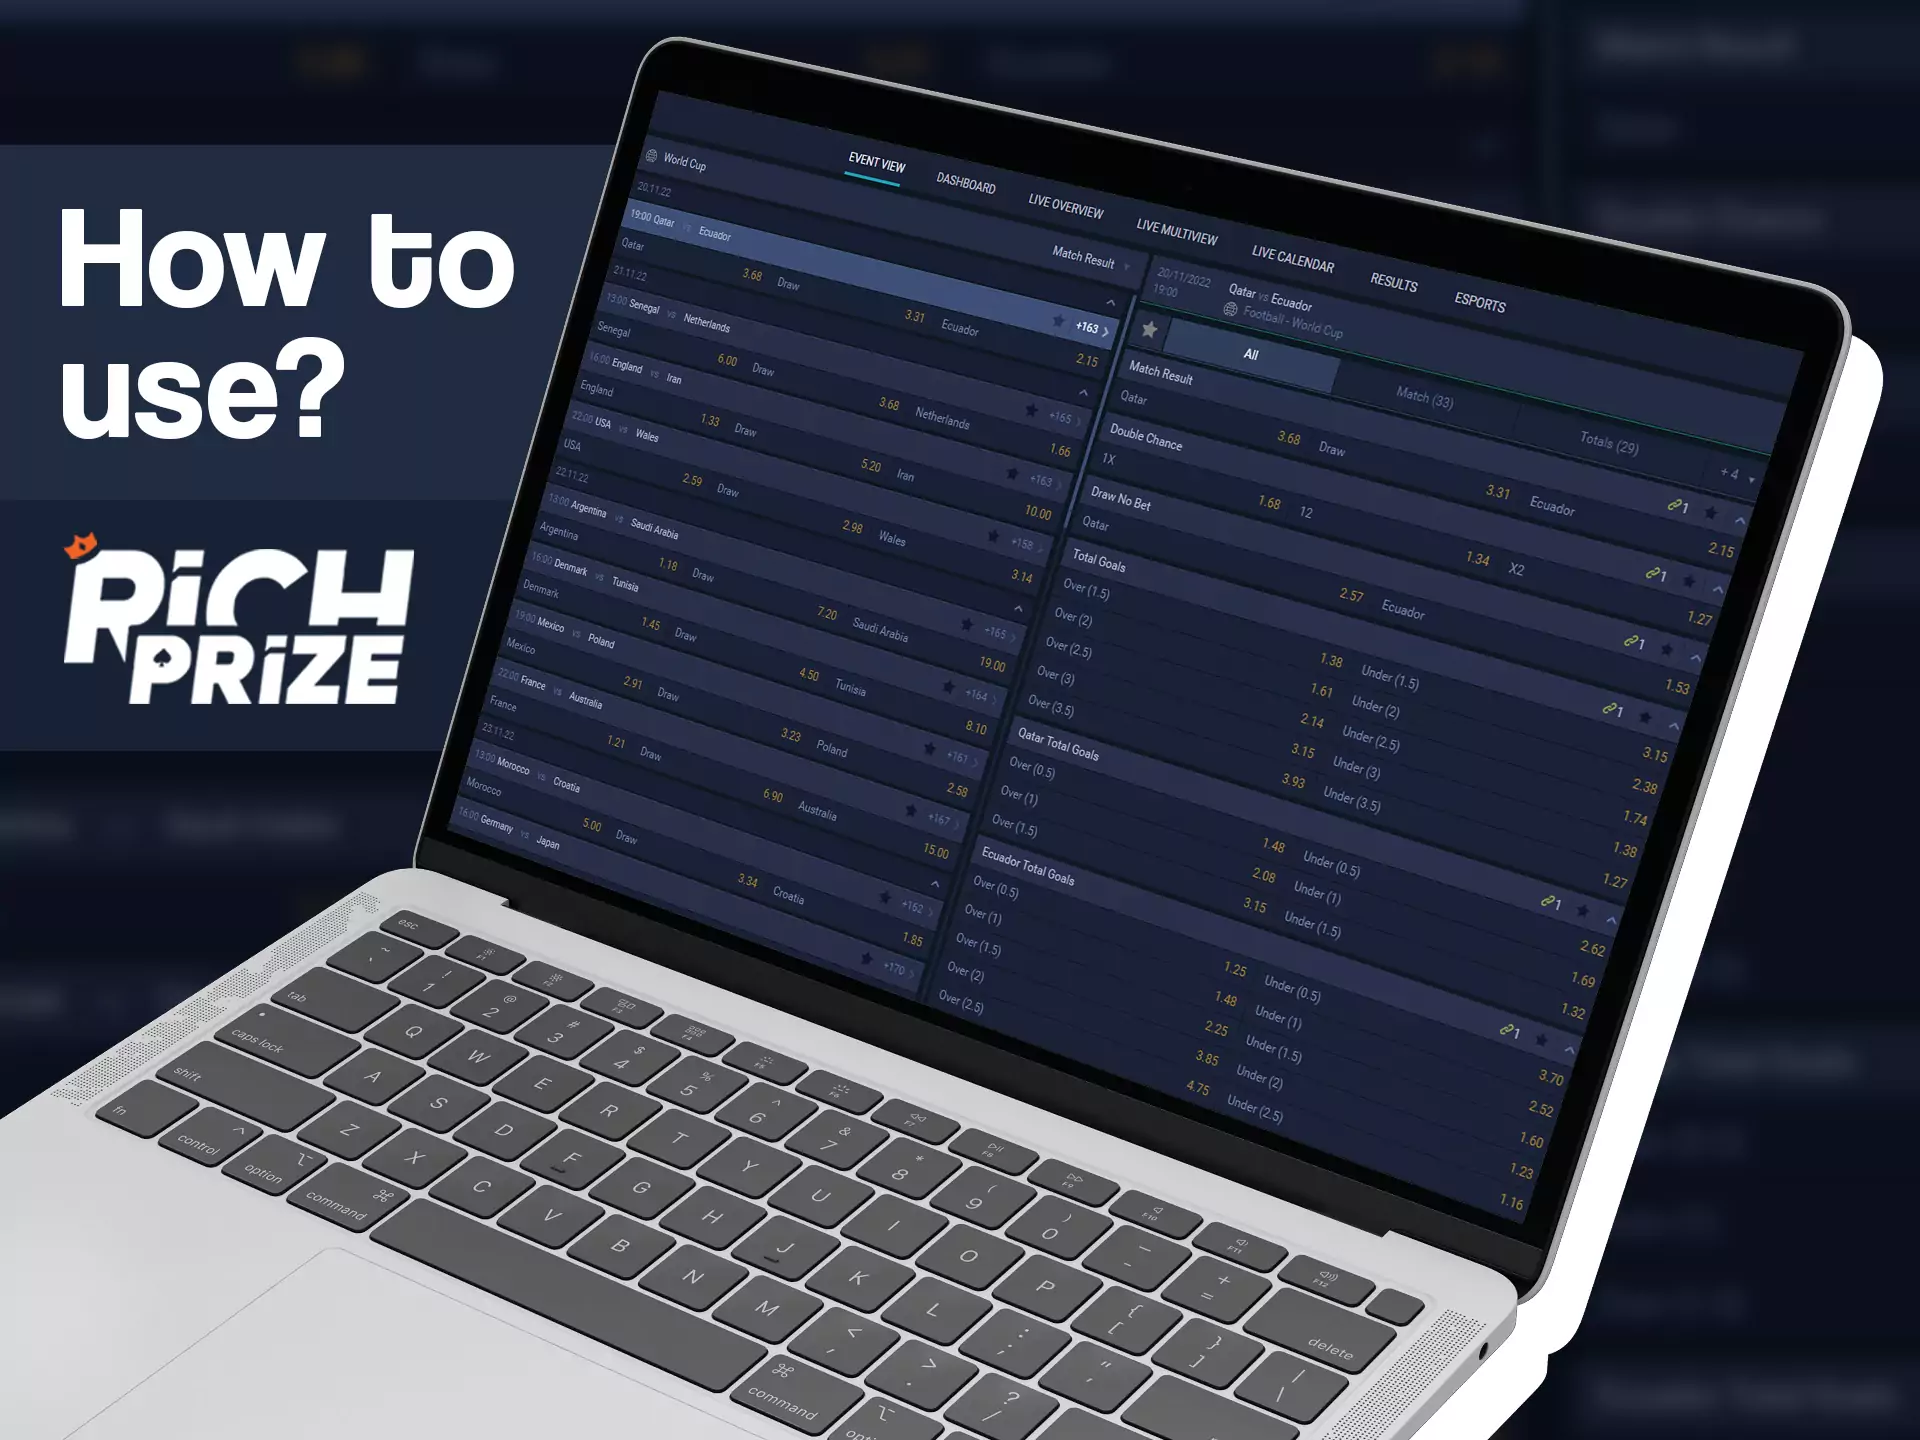 Use RichPrize website on any device that can run it.